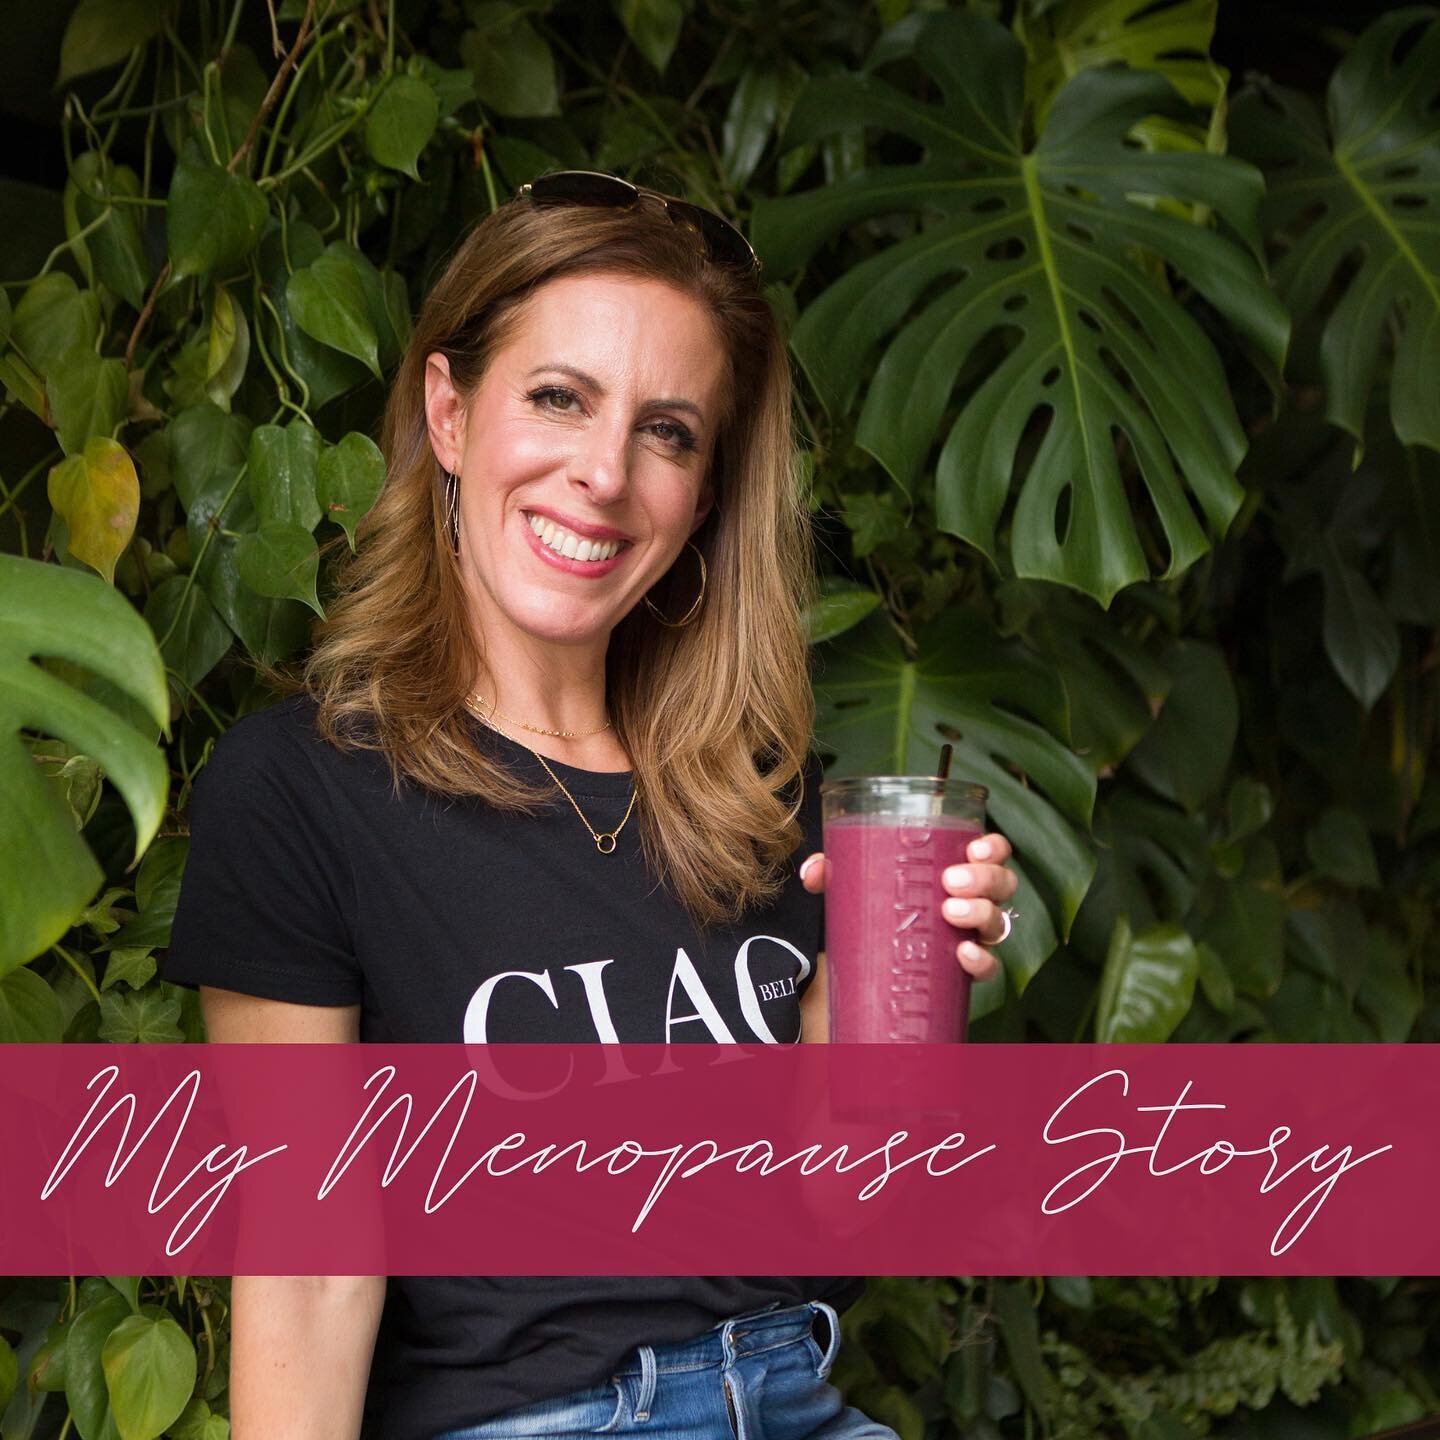 'I didn&rsquo;t realize that perimenopause had started but the weight was adding up, I didn&rsquo;t like how I looked in the mirror (and had to hide my expanding belly with flowy tops, ugh!), my concentration was lacking, and my energy was super low.